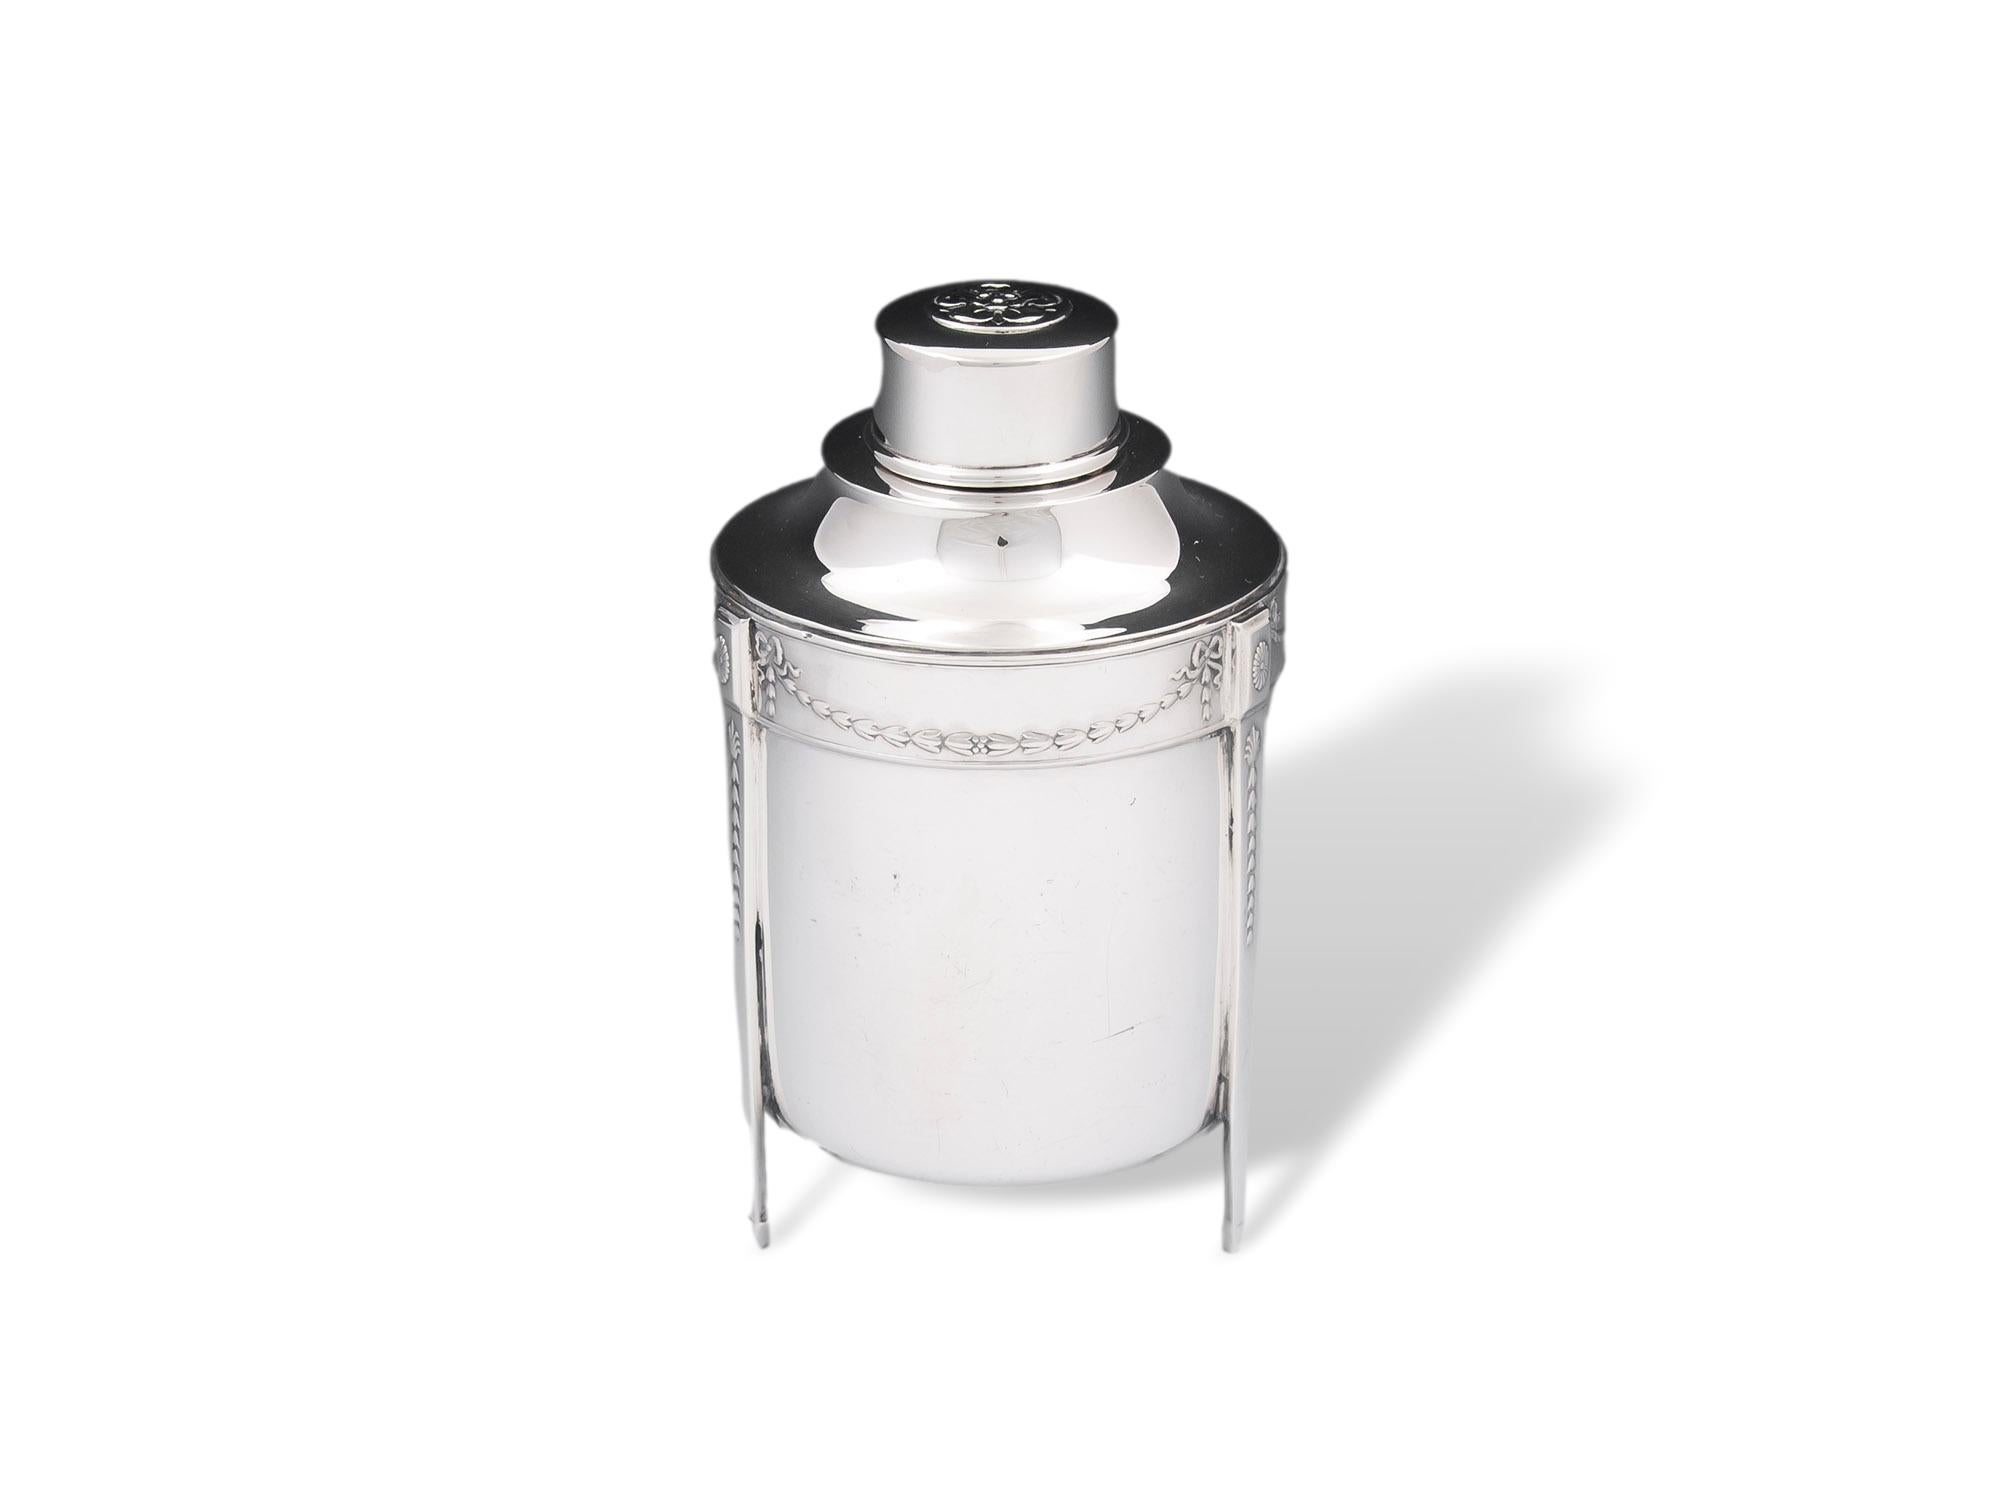 From our Tea Caddy collection, we are pleased to offer this Edwardian Sterling Silver Tea Caddy. The Tea Caddy of cylindrical shape with a slightly tapered body stood upon three straight legs. The Tea Caddy beautifully cast with swags of bellflowers